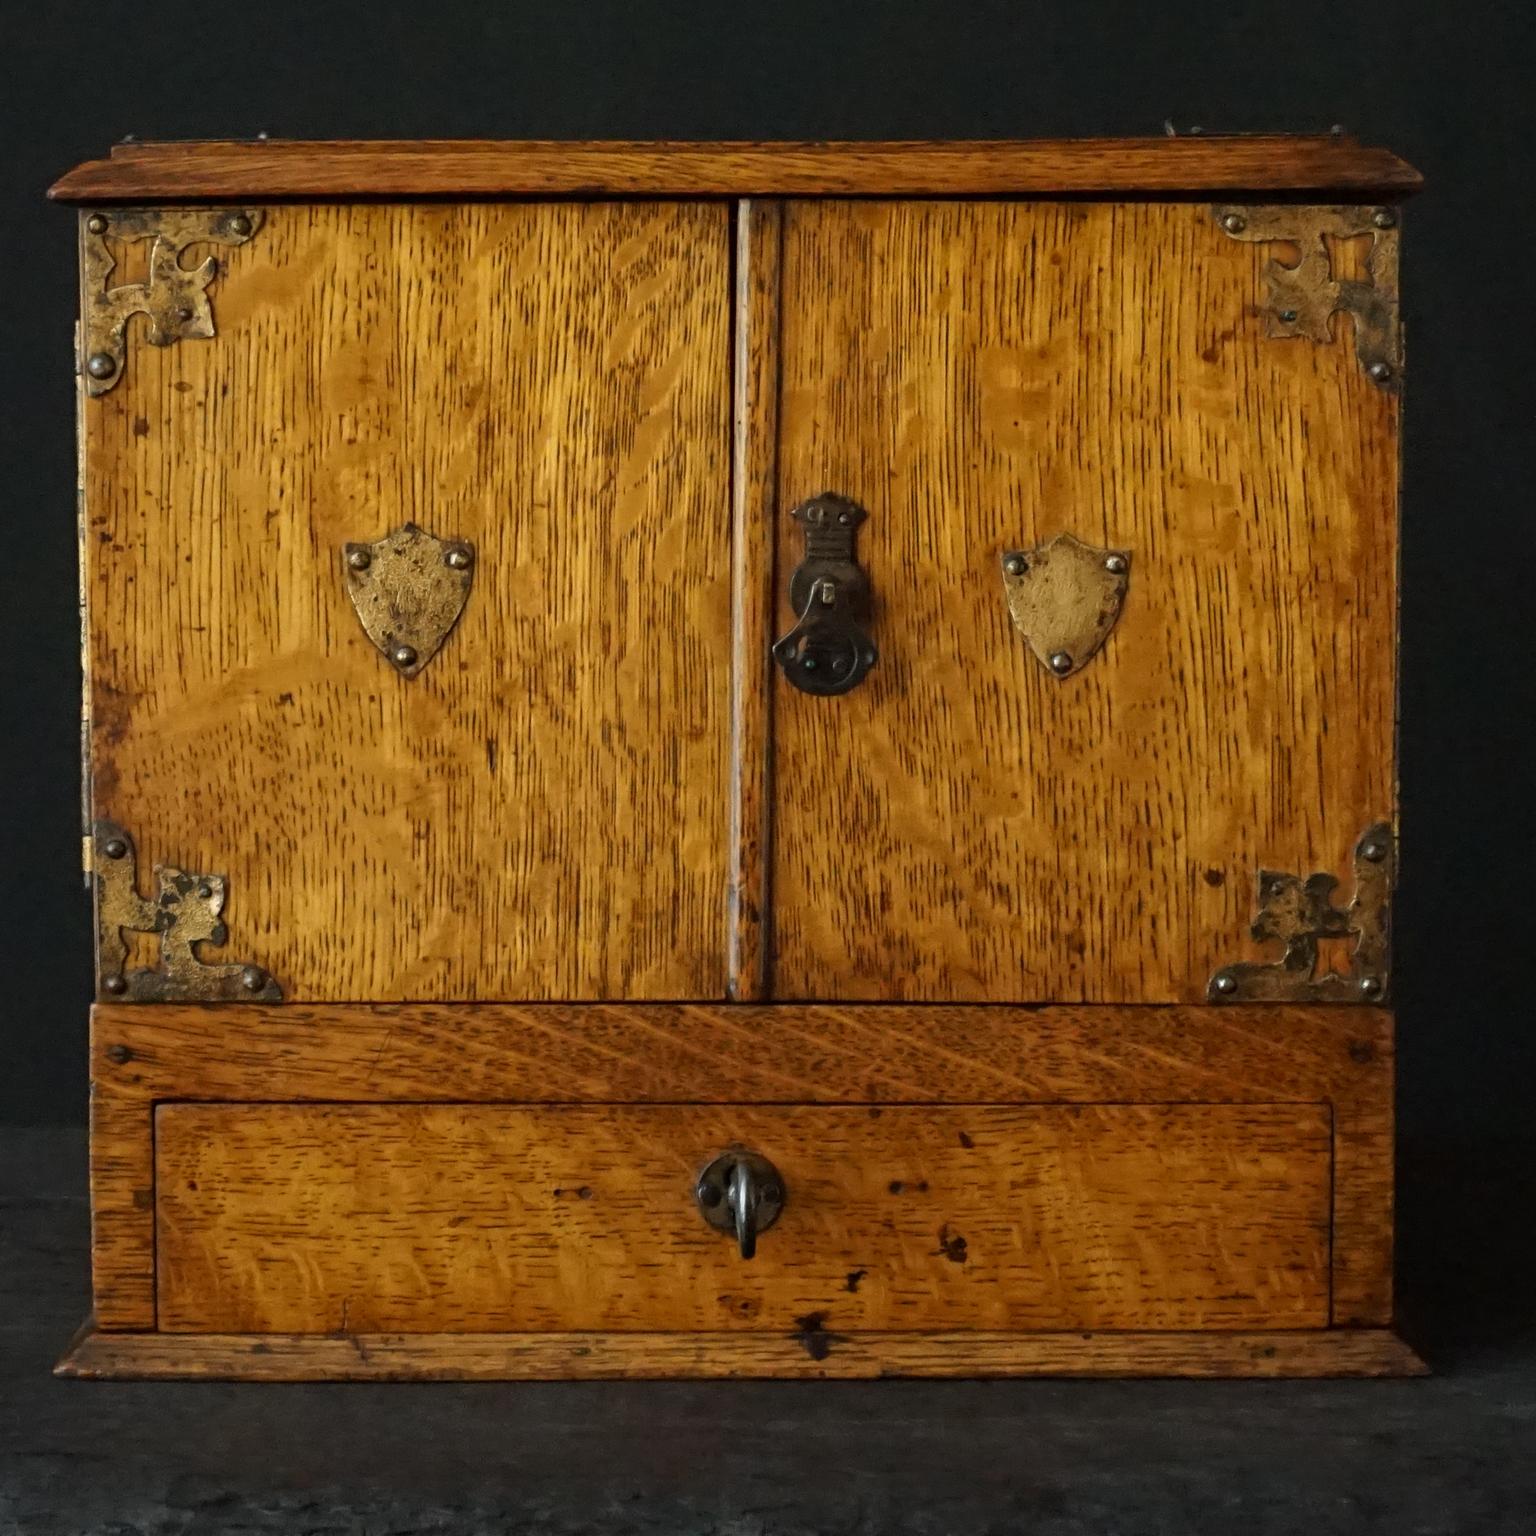 Very decorative pretty late 19th century Victorian oak cigar humidor, shaped as little drawer cabinet with metal decoration.
On the metal shield on the left door it reads a W, on the right I can make out very vaguely some letters (maybe a name?)